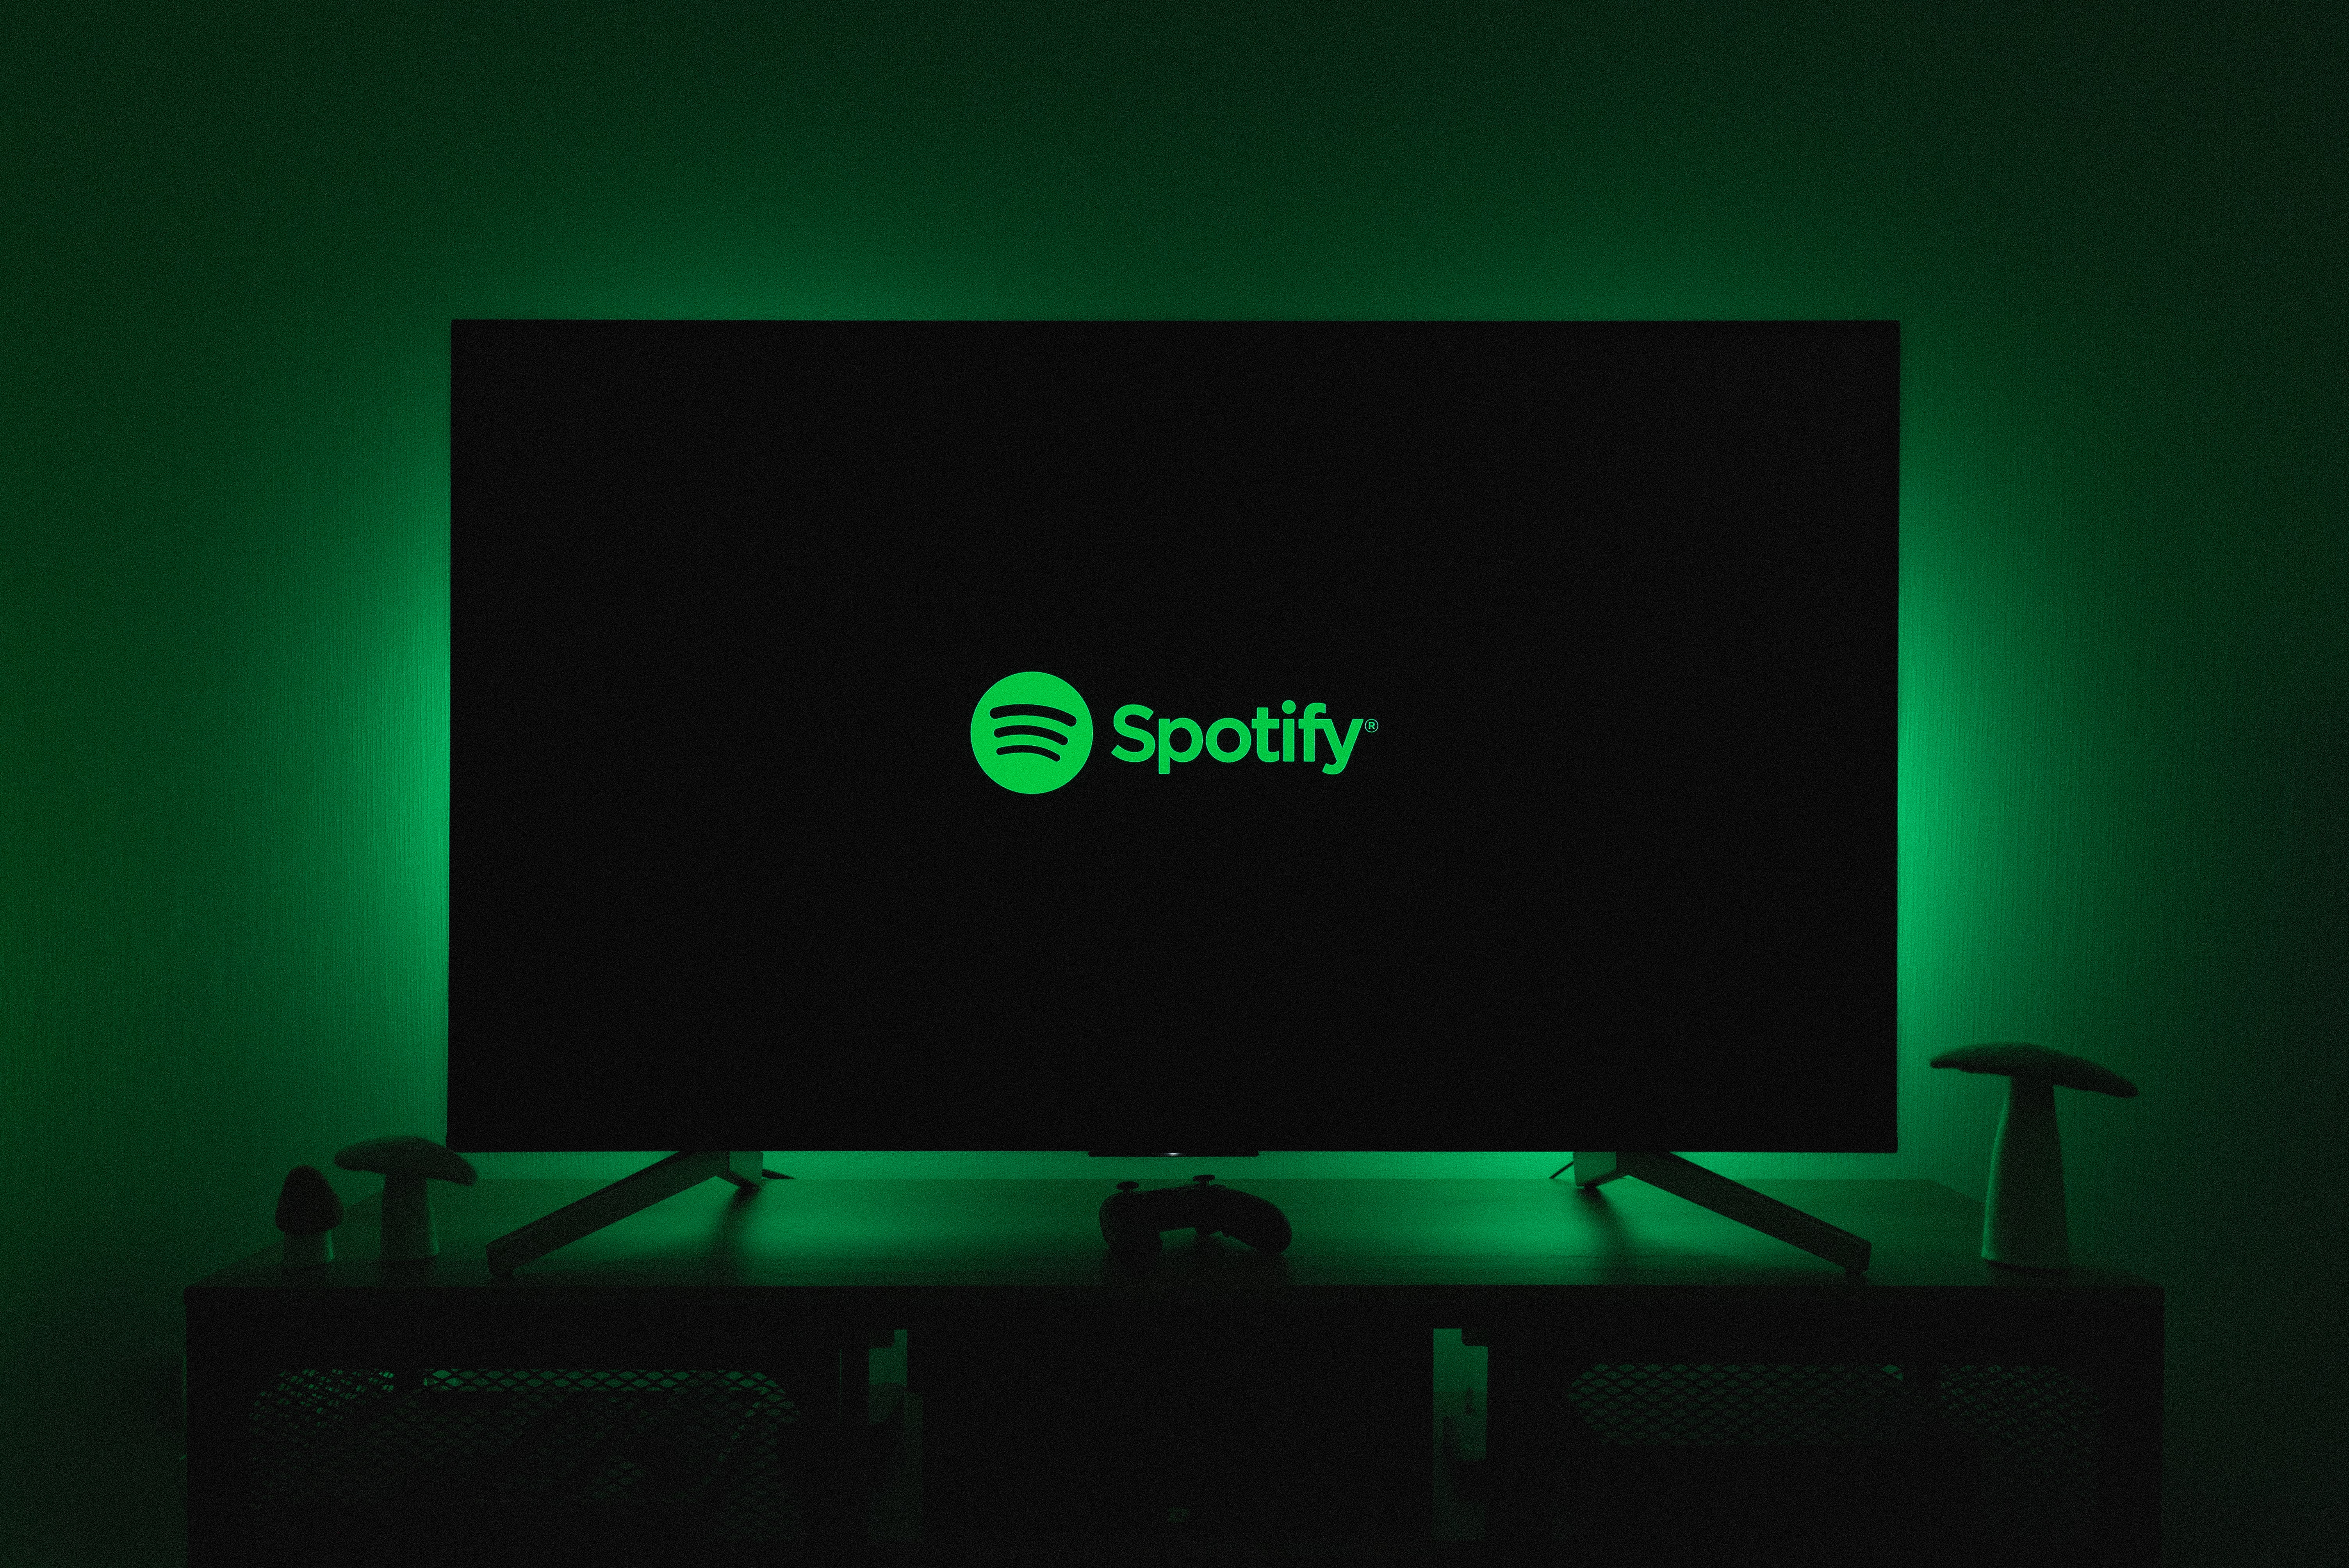 CEO of Spotify says that the firm will begin testing audiobooks "very soon"